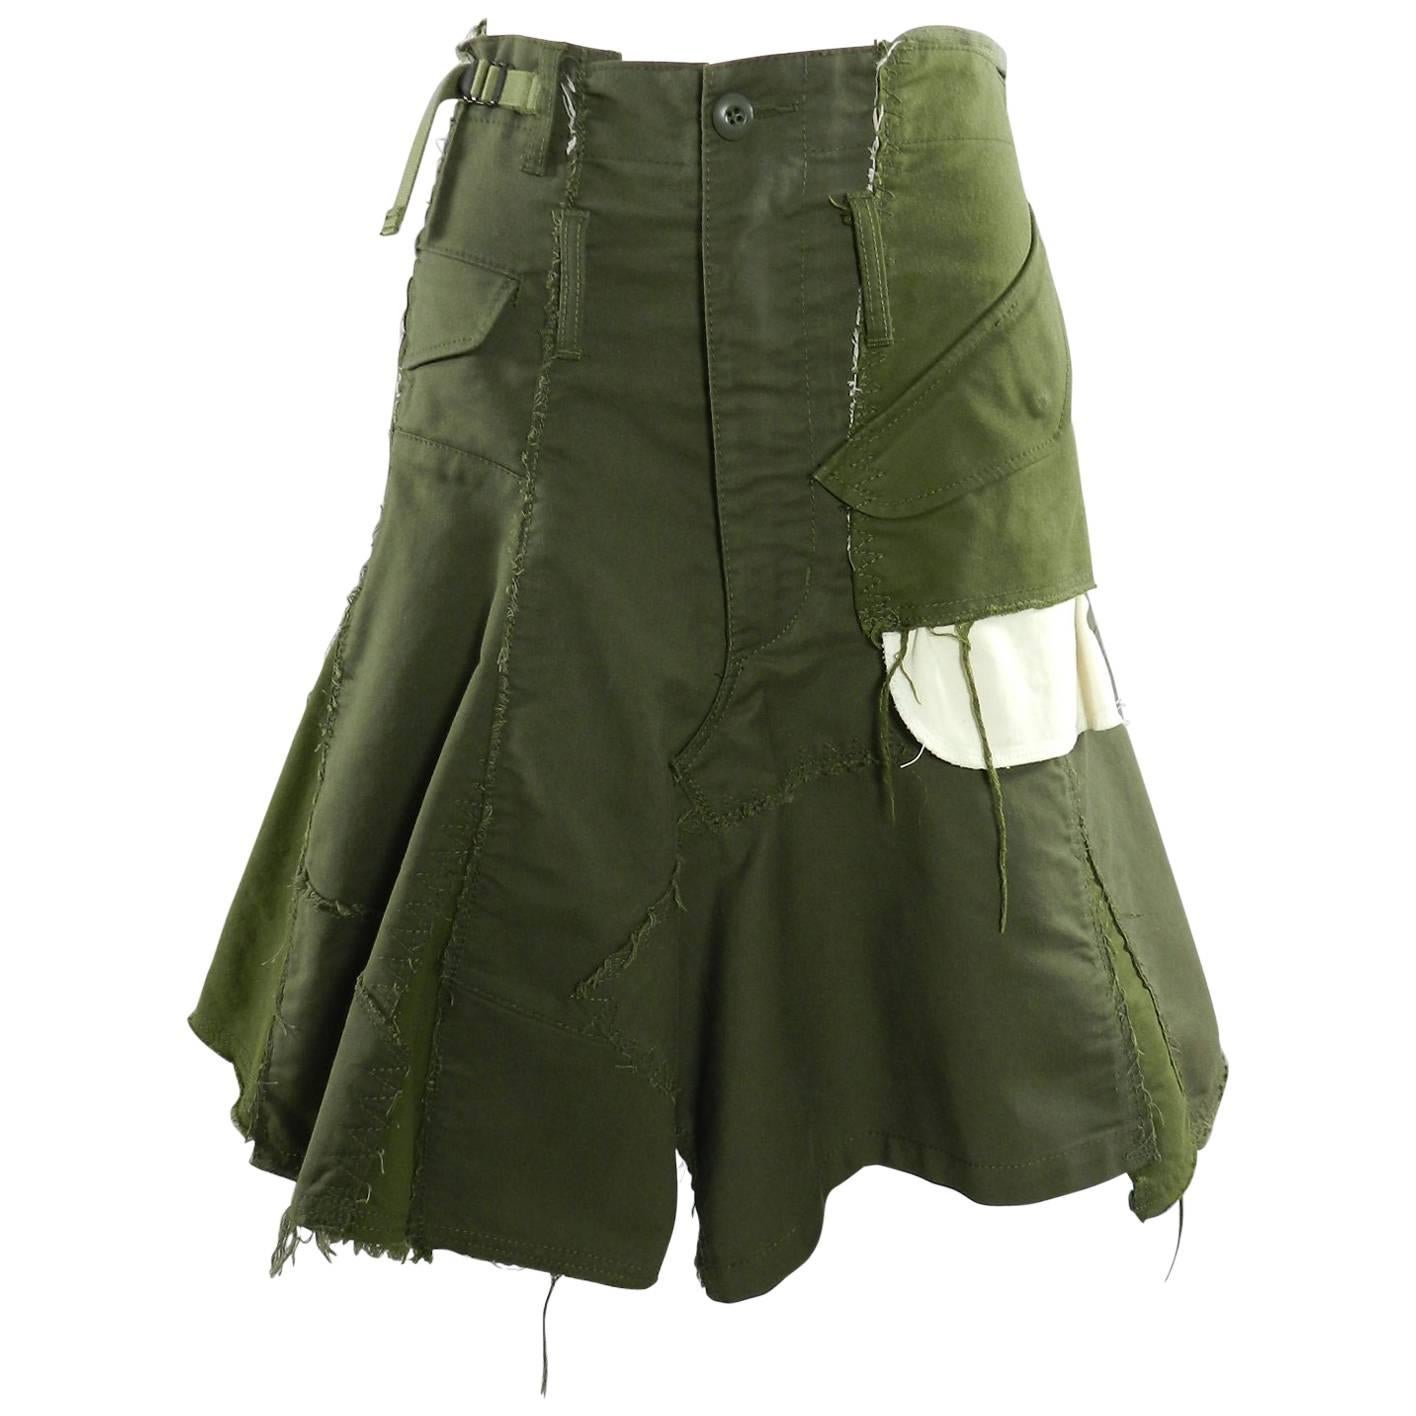 junya watanabe comme des garcons Deconstructed Army skirt